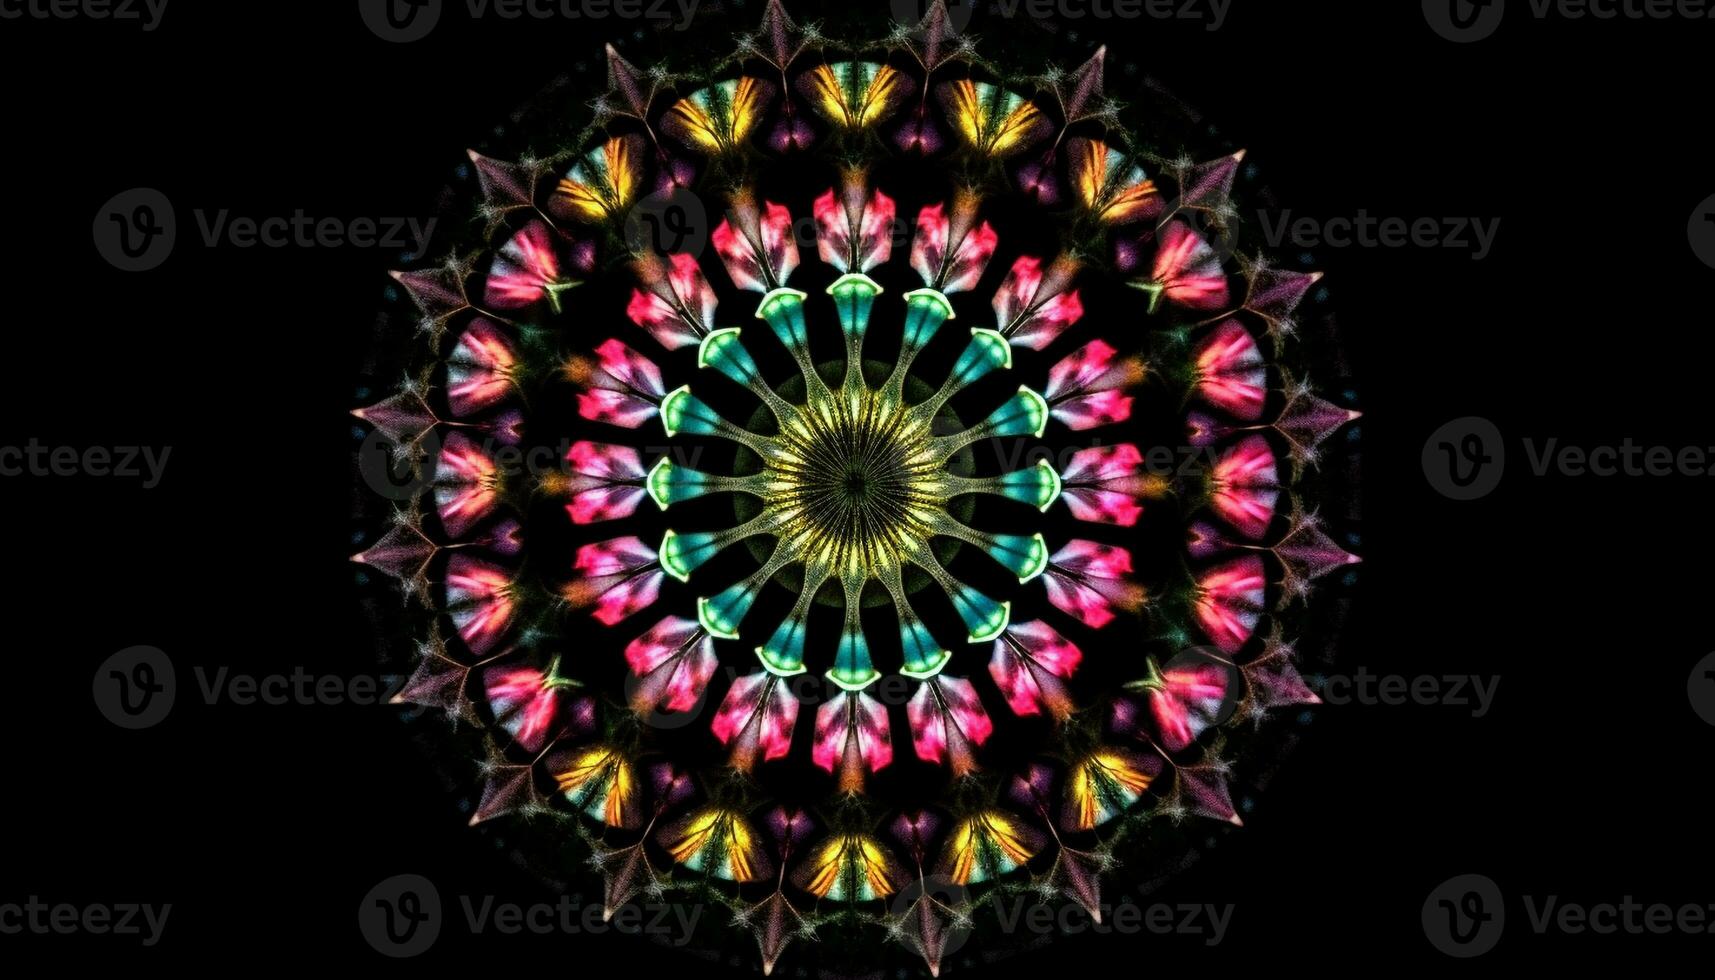 Geometric shapes blend in abstract pattern, creating a mesmerizing design generated by AI photo